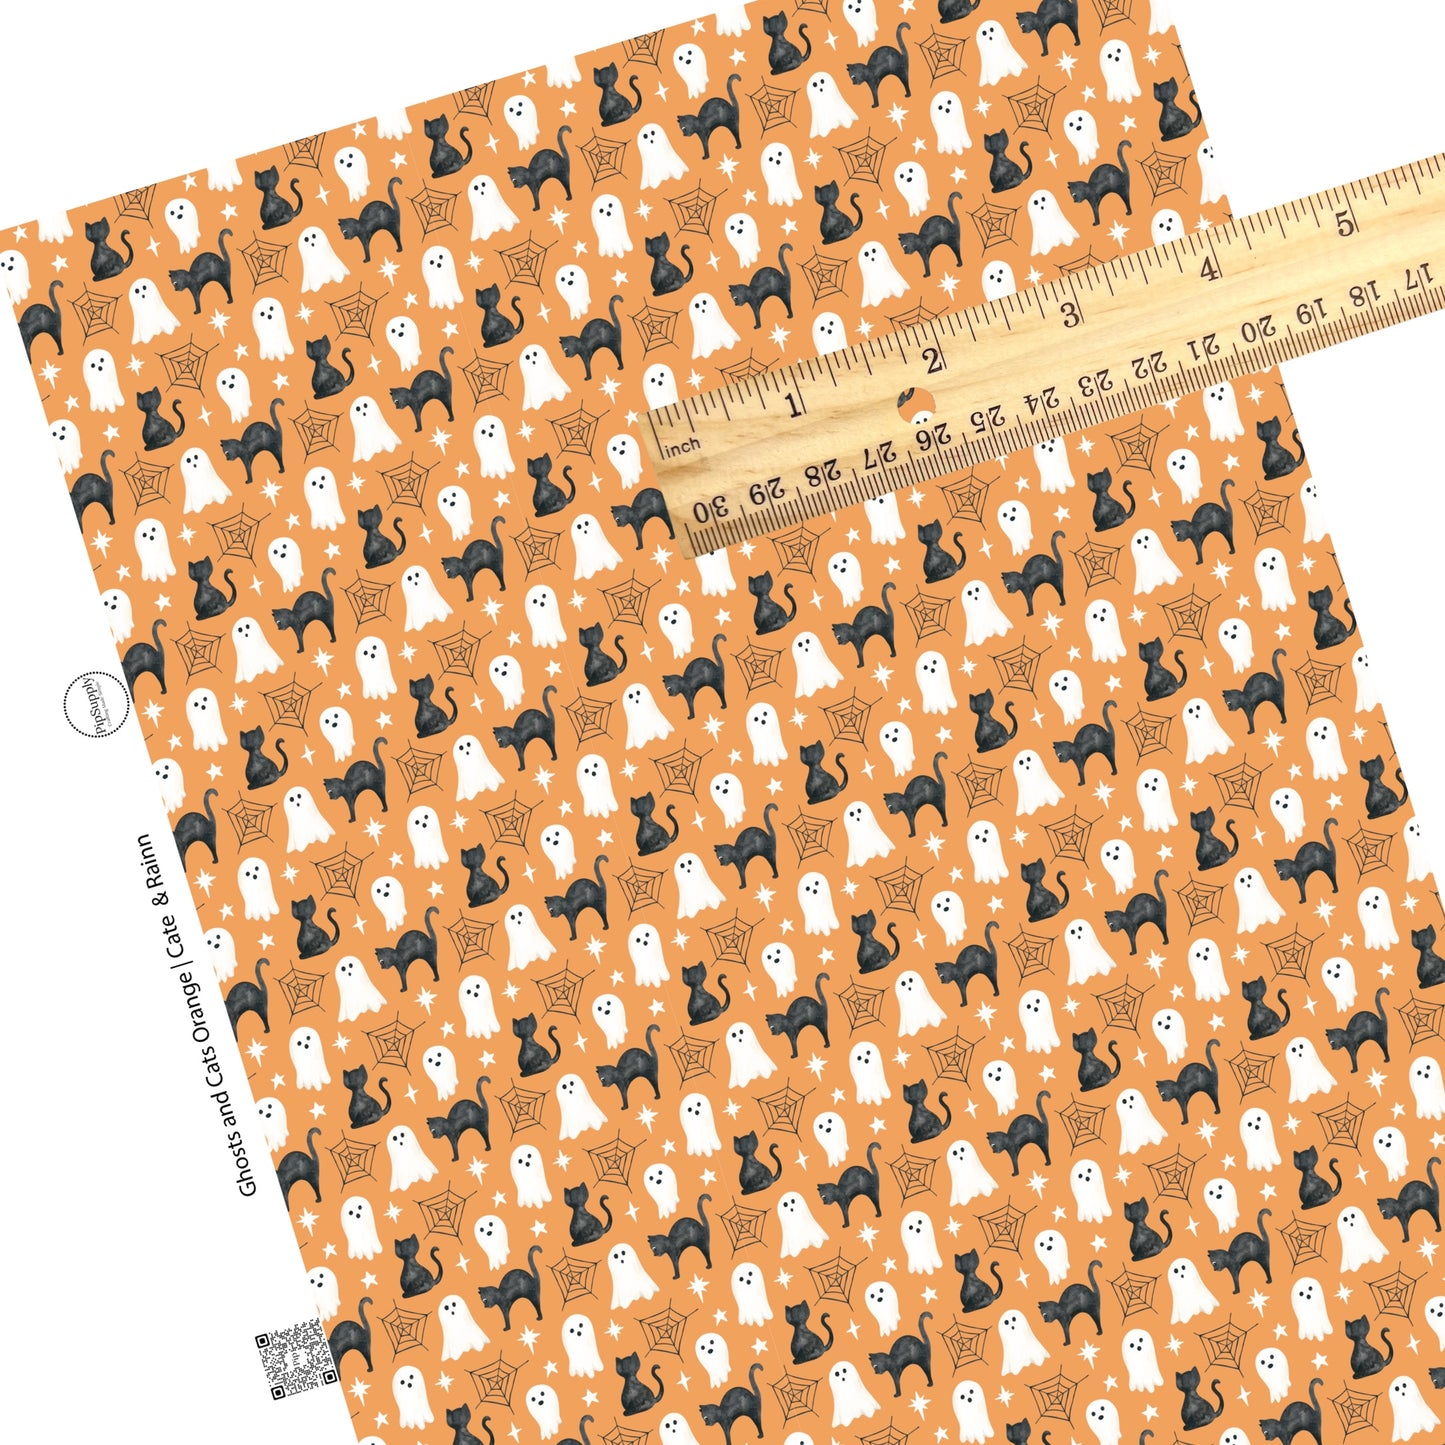 These Halloween themed orange faux leather sheets contain the following design elements: black cats, ghost, spiderwebs, and small white stars on orange. Our CPSIA compliant faux leather sheets or rolls can be used for all types of crafting projects.